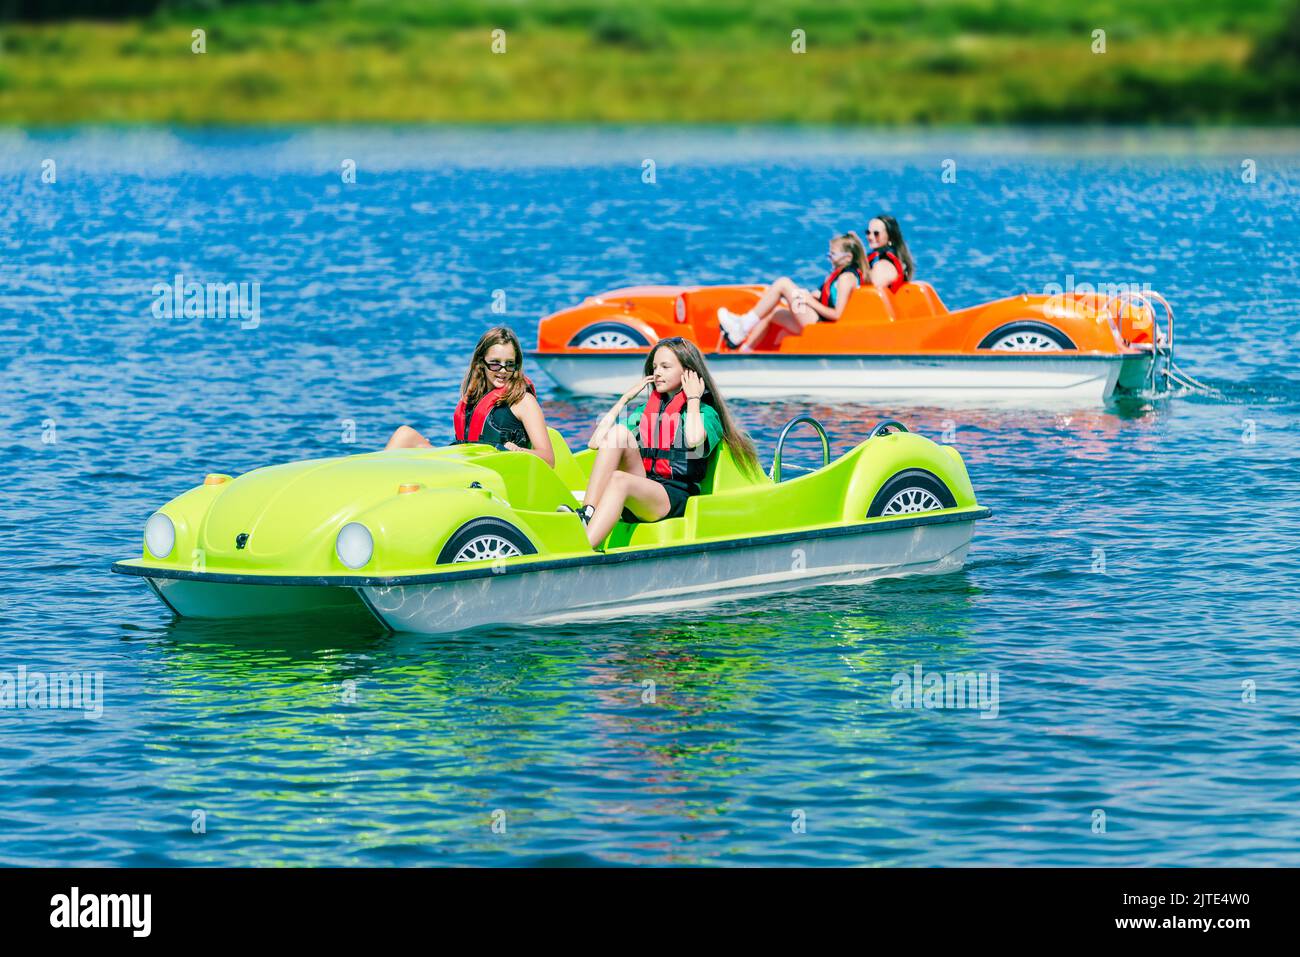 Two pedal boats on a mountain lake with teenagers Stock Photo